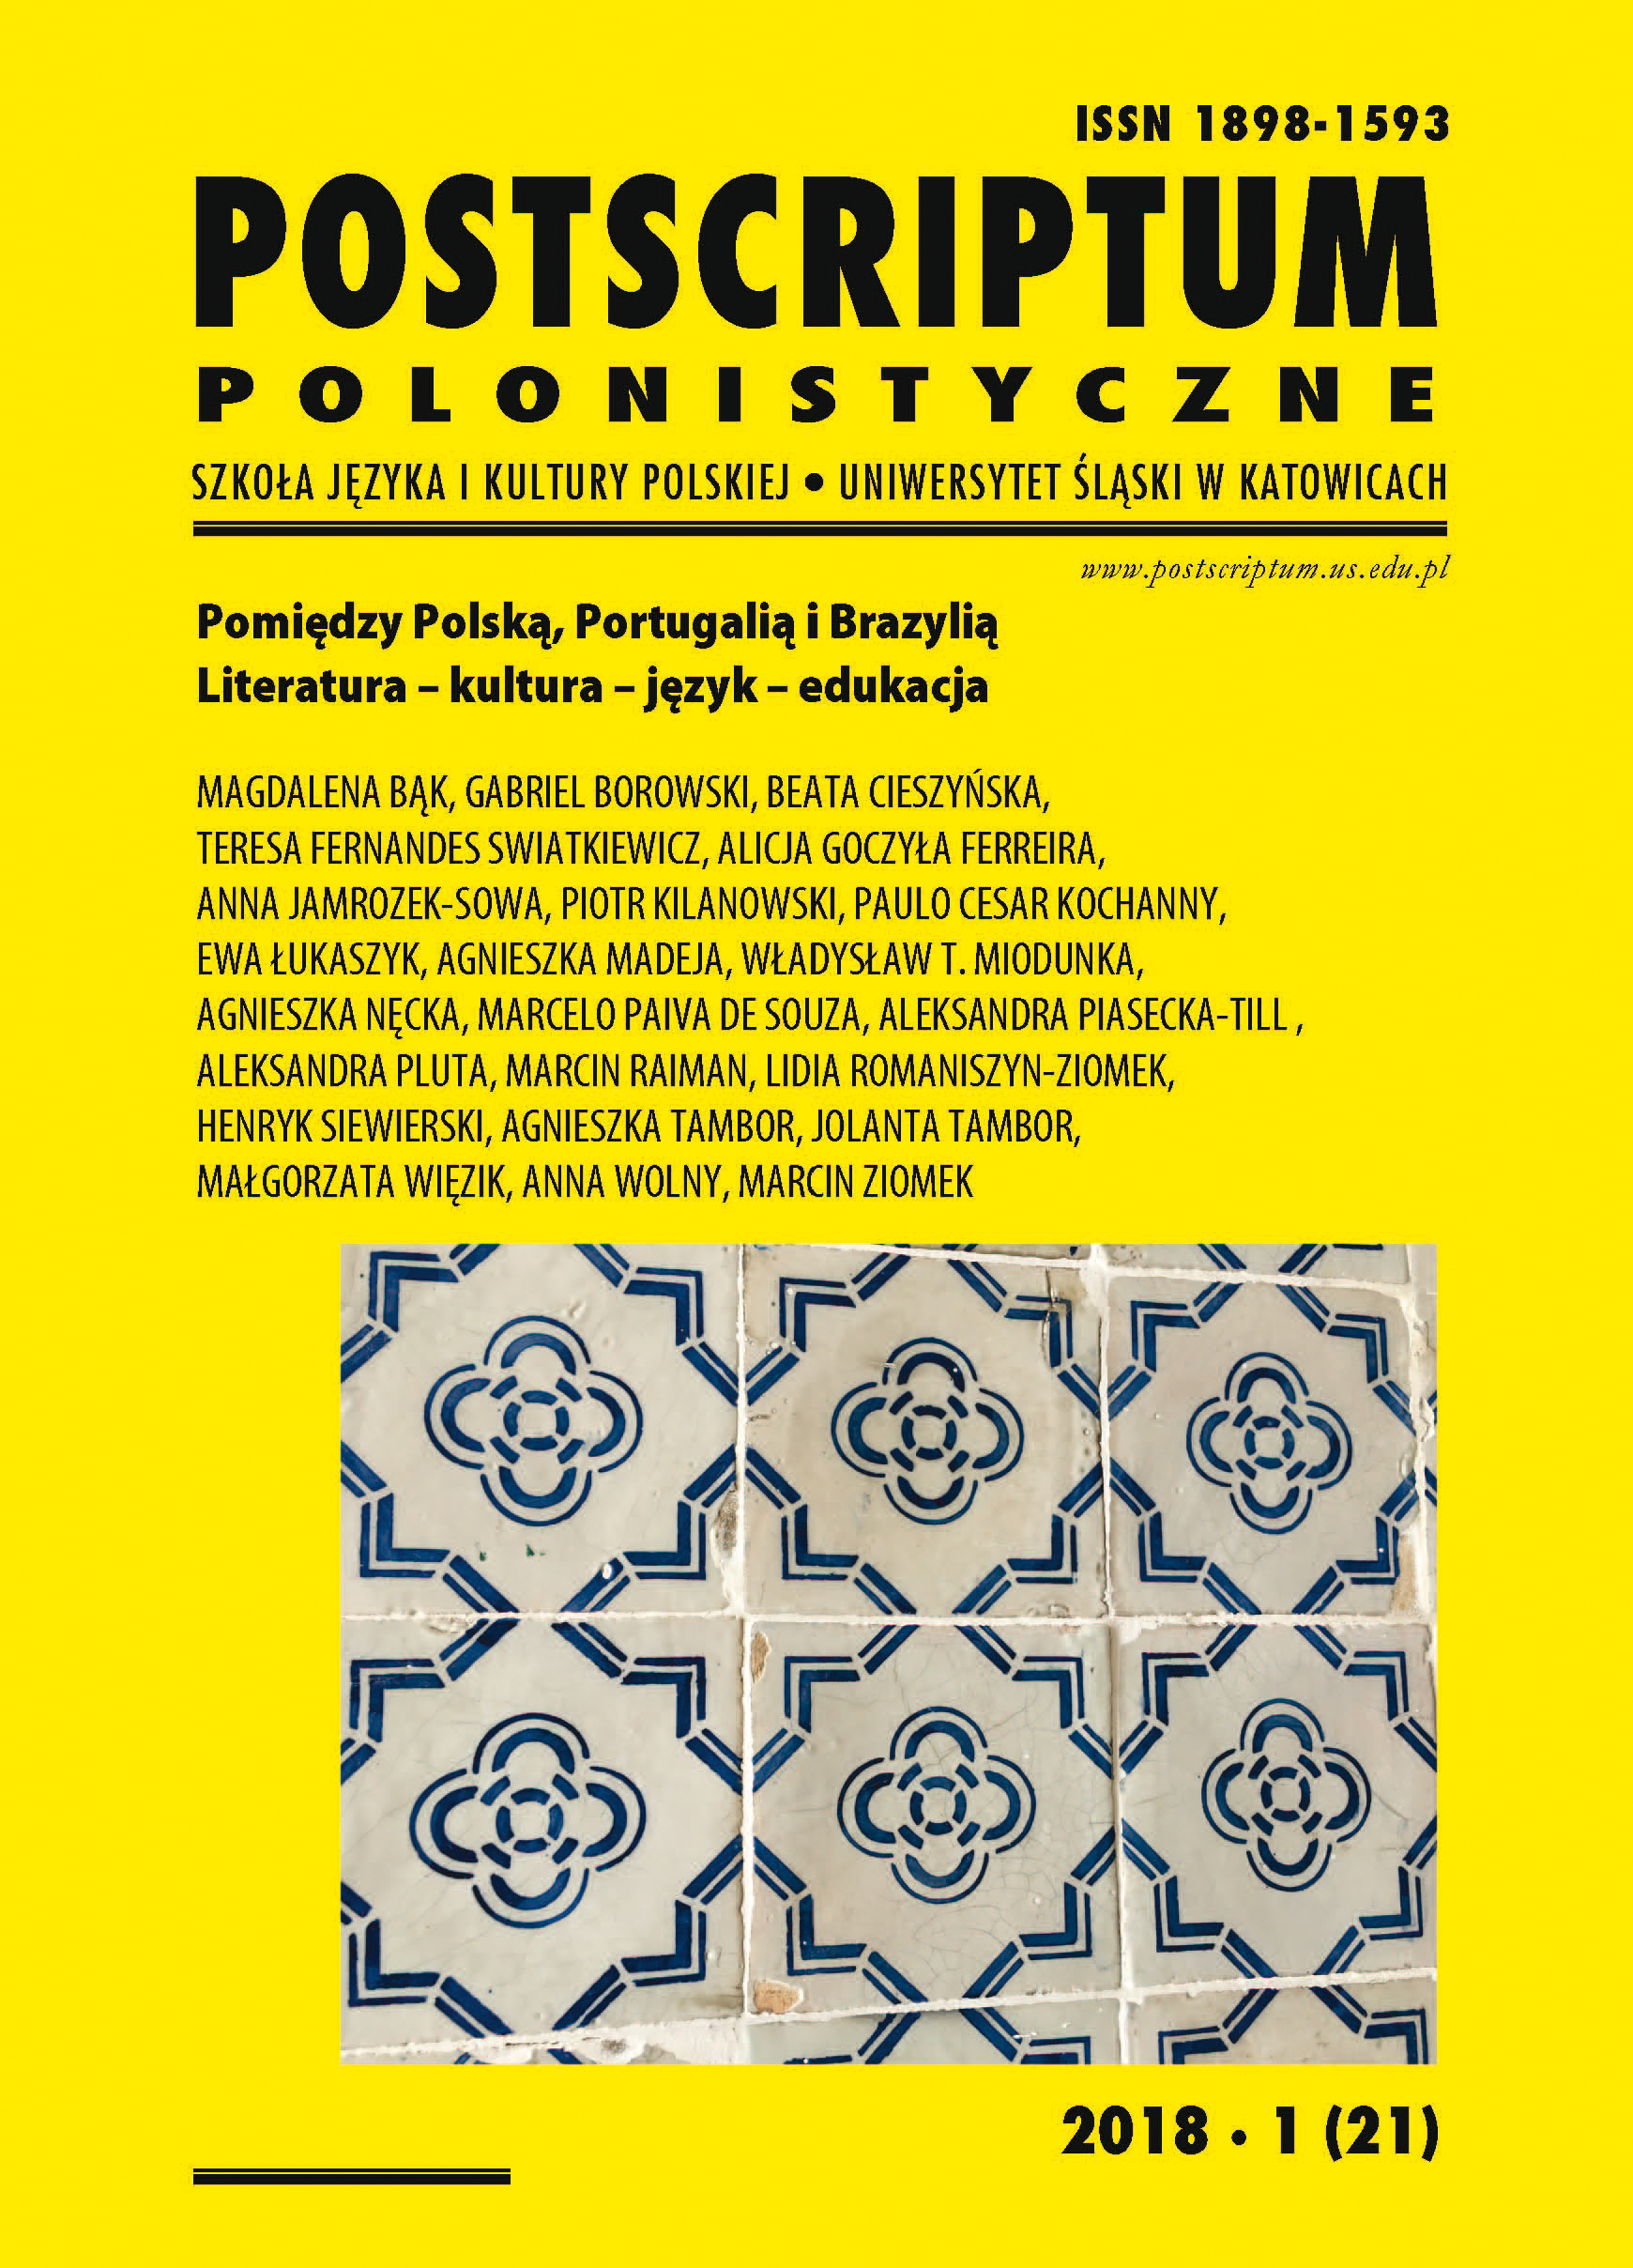 Speaking Polish, Brazilian and Portuguese – on language awareness of Polish diaspora in Brazil. Revival and disappearance of a language Cover Image